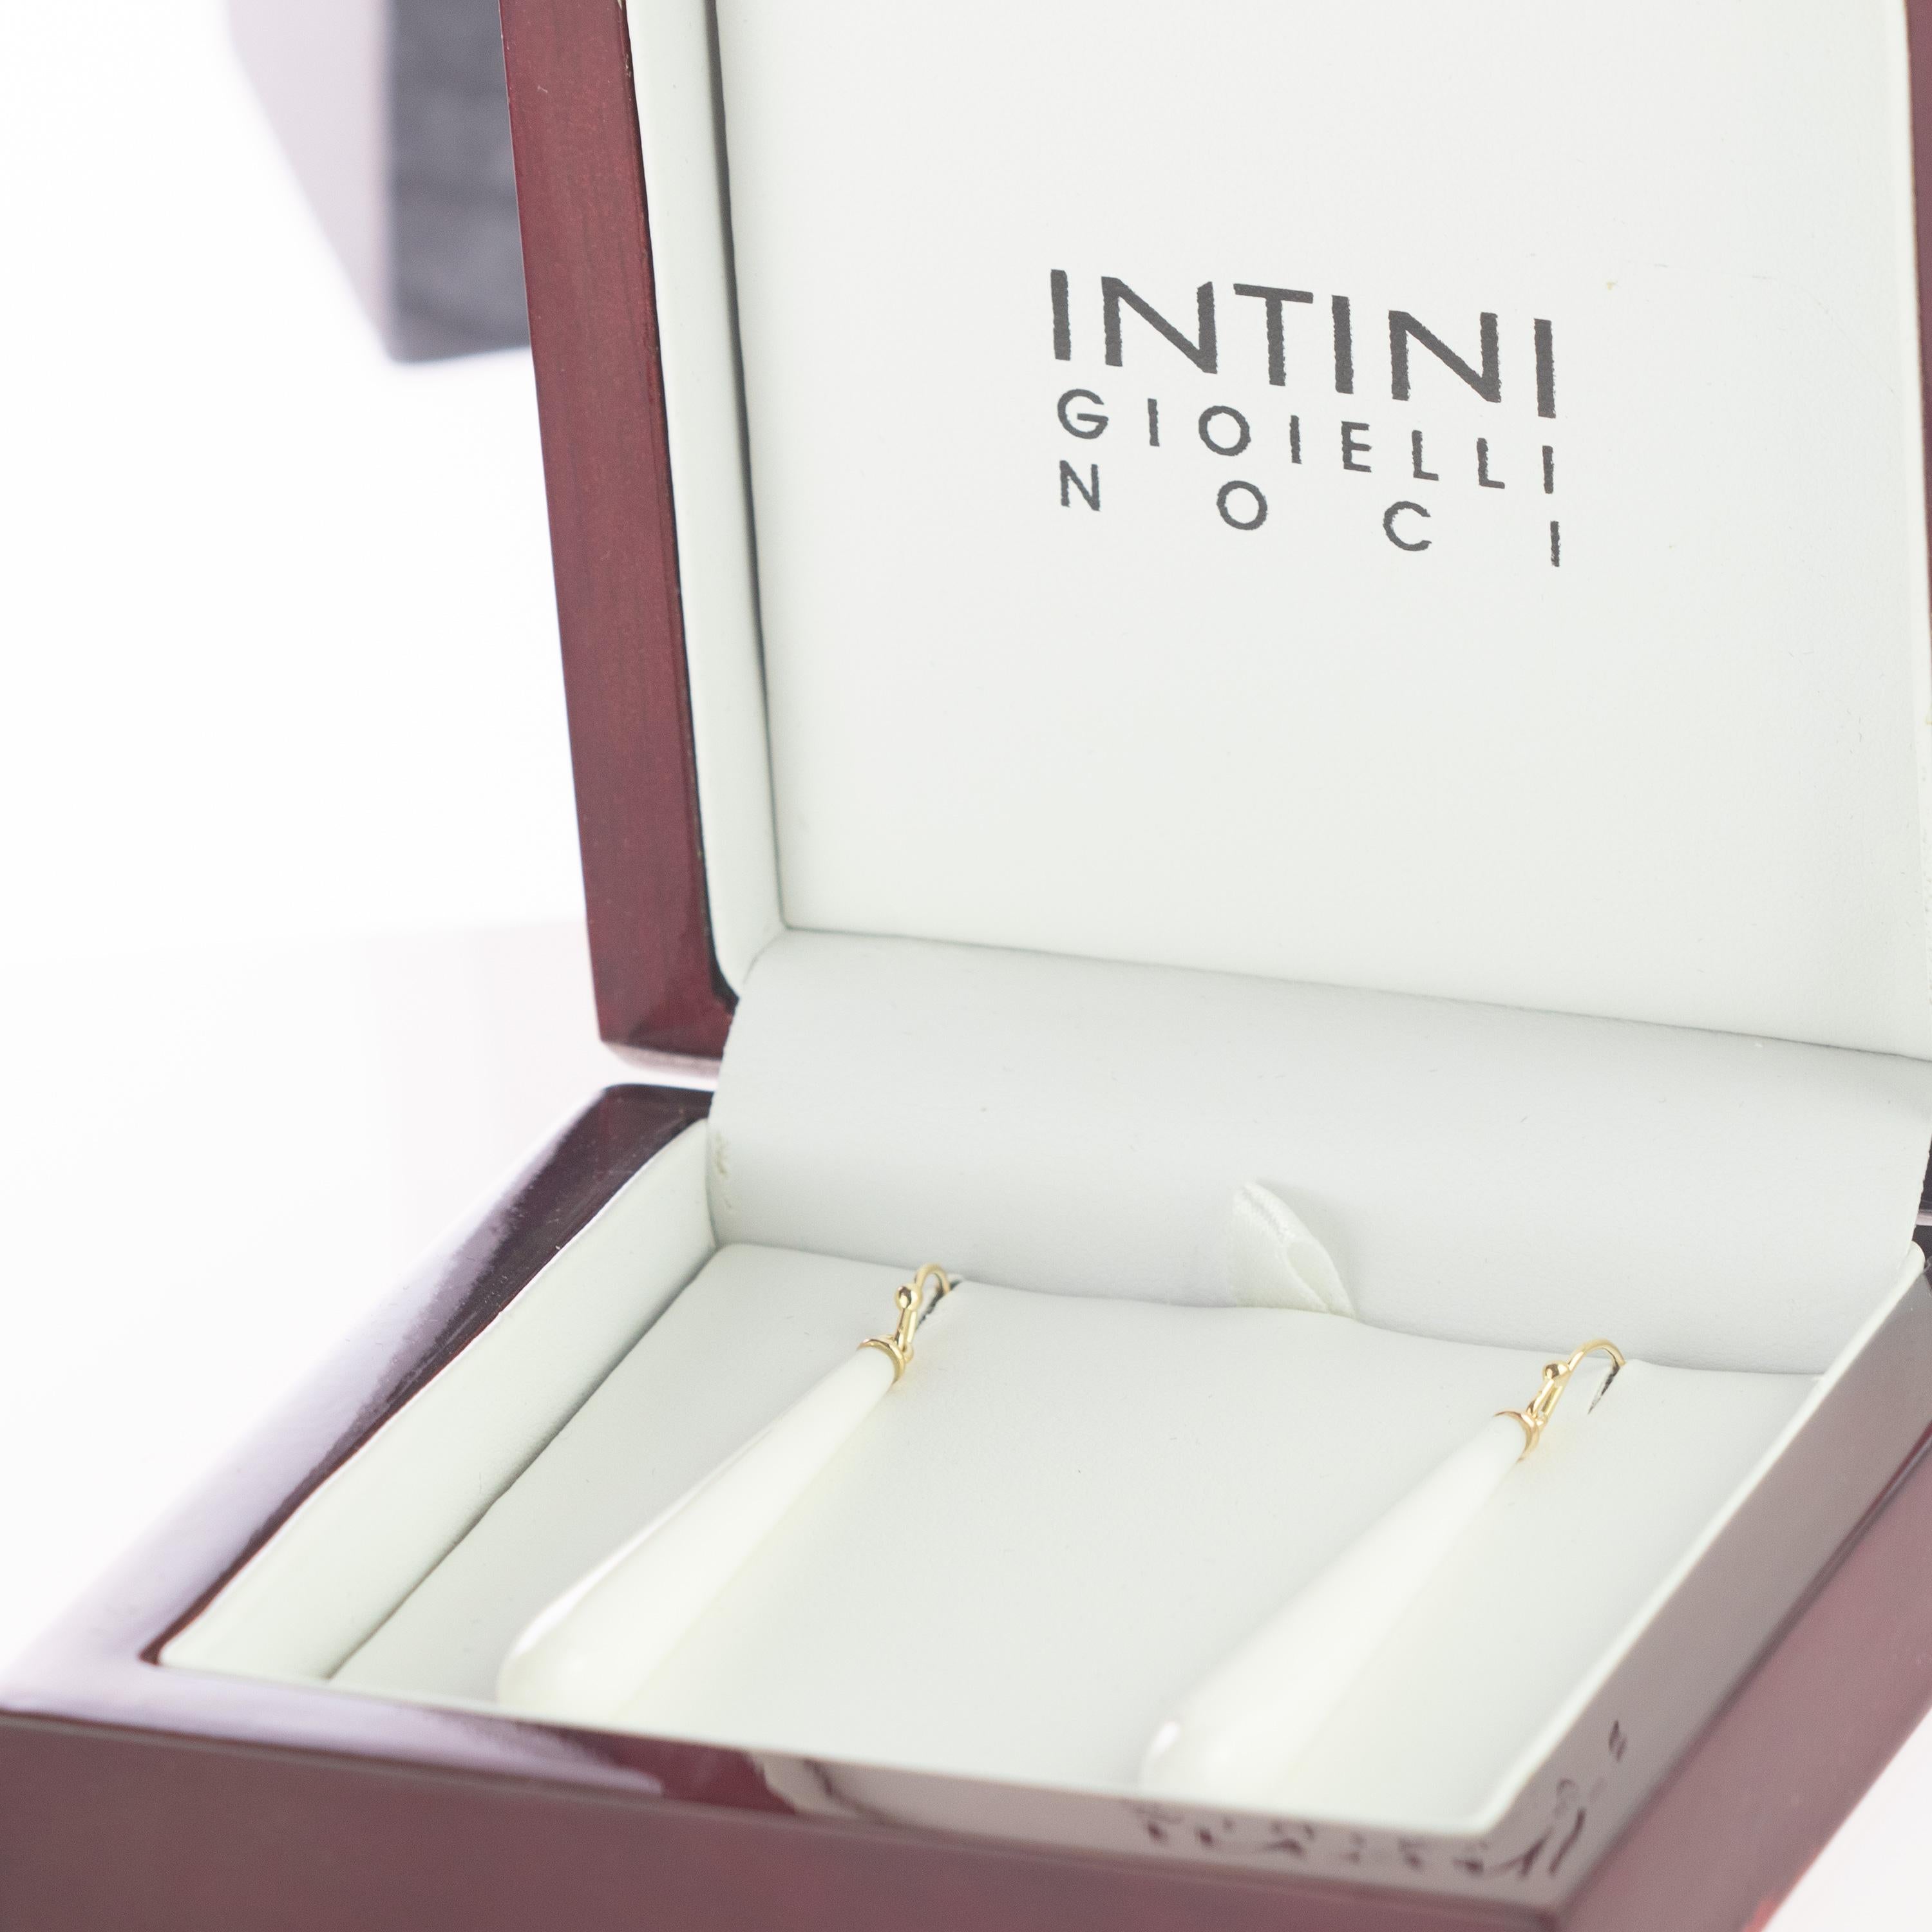 This stunning masterpiece with high quality craftsmanship was born in the Intini Jewels workshop. Our designers add all the italian modern style and glamour in one exquisite piece. Stunning 41 carat white Agate sharp and flat teardrop, hanging from